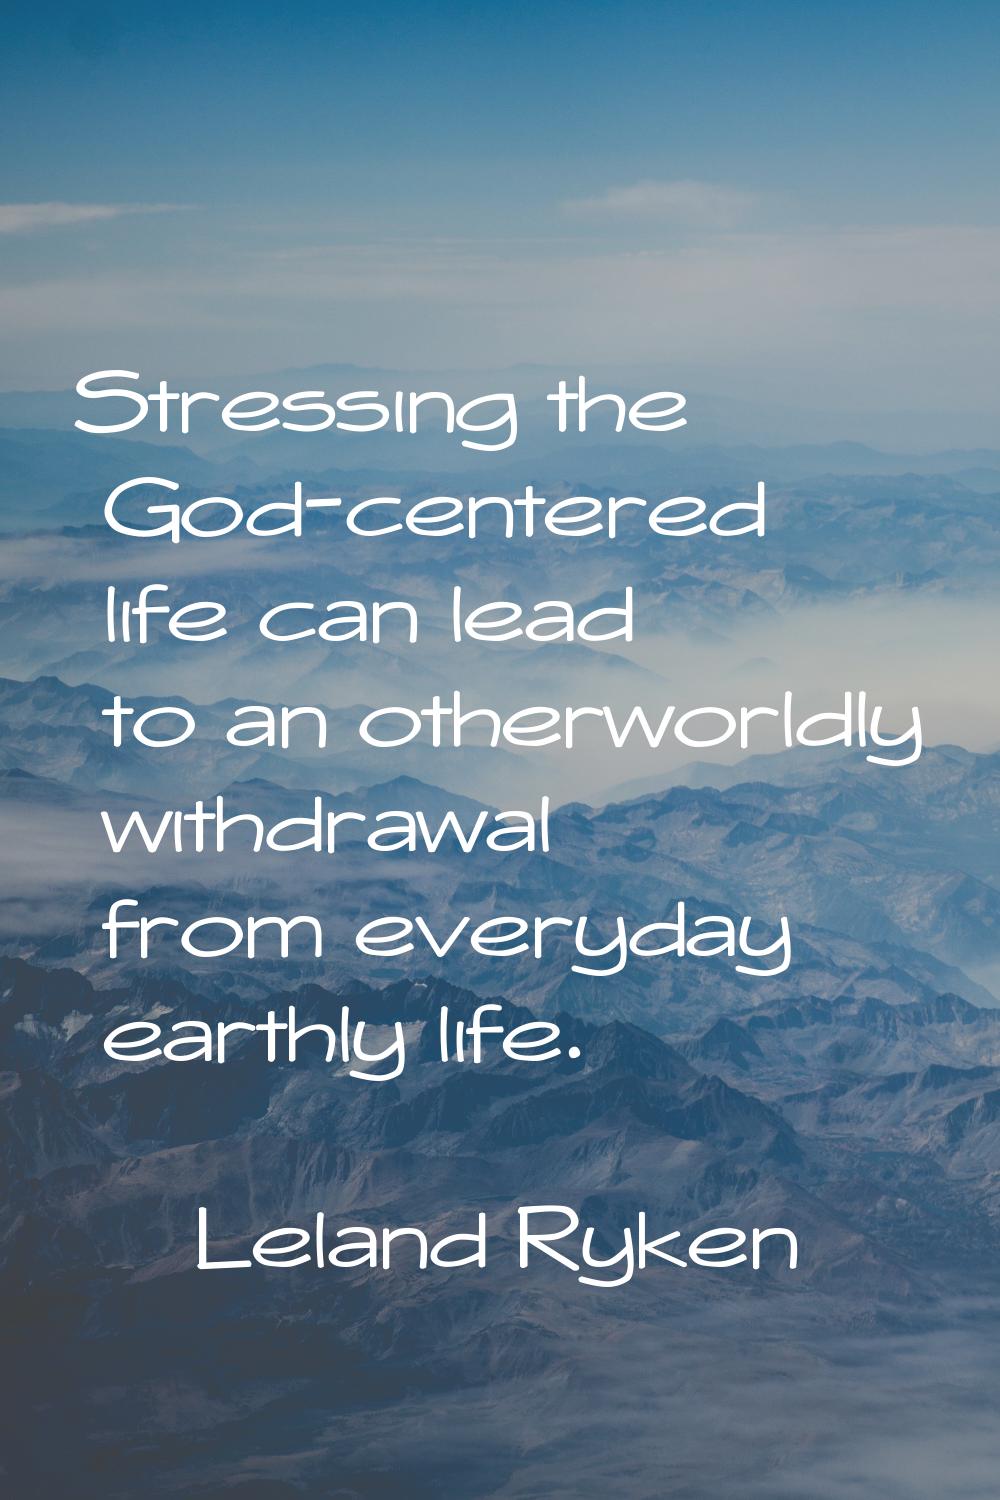 Stressing the God-centered life can lead to an otherworldly withdrawal from everyday earthly life.